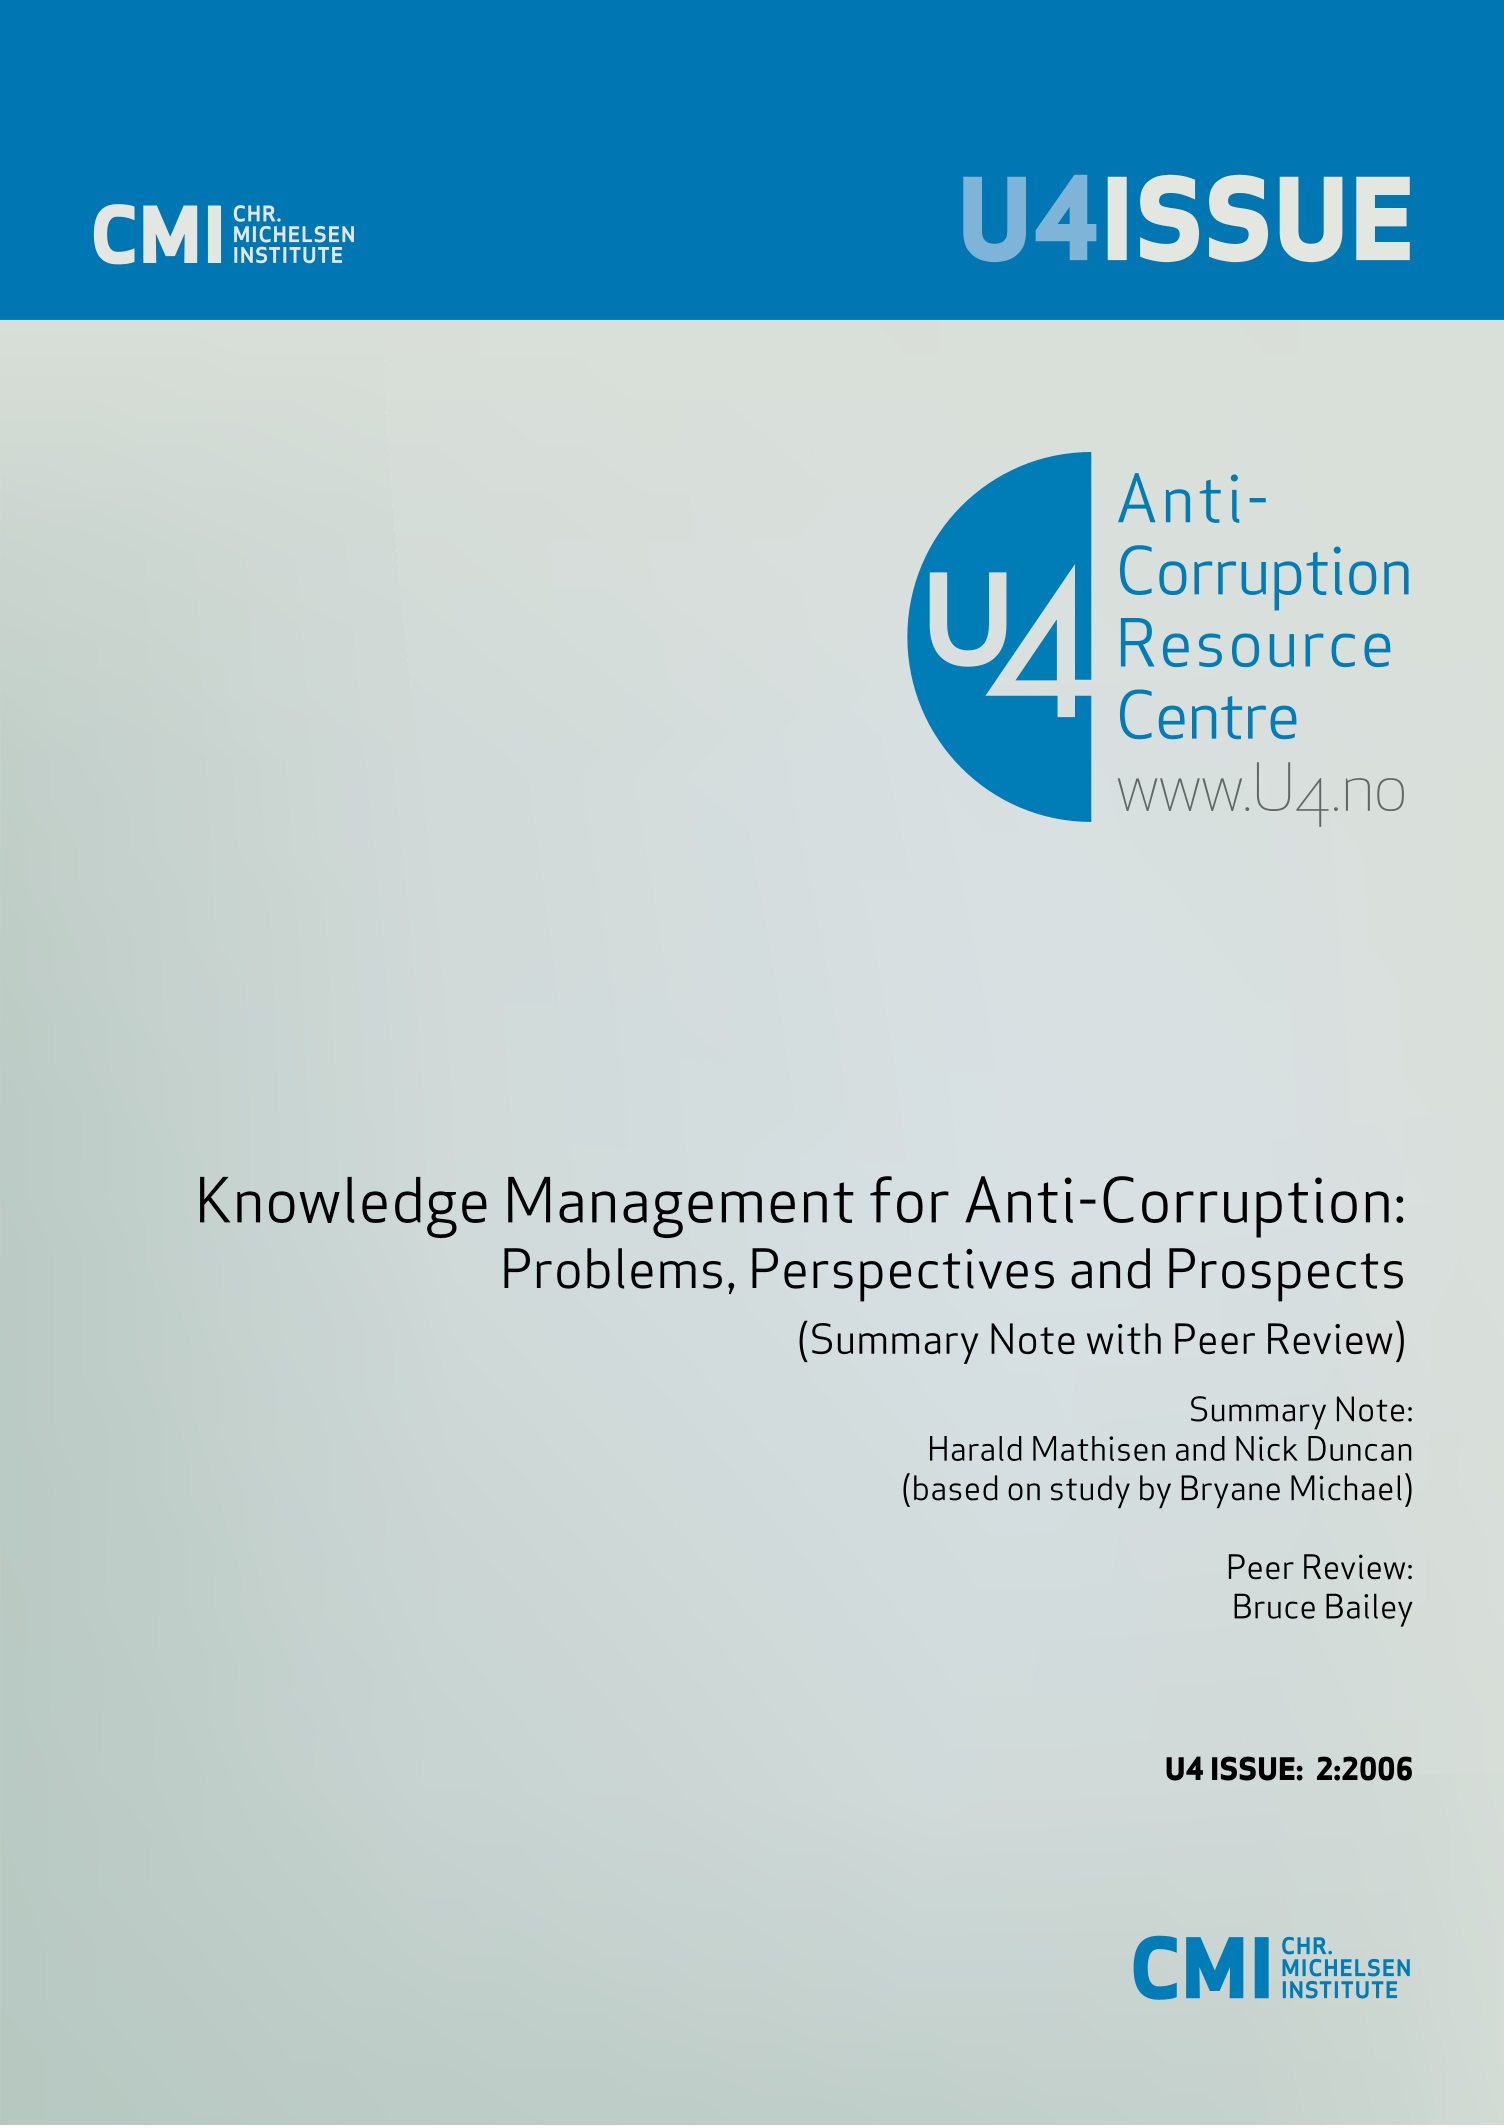 Knowledge management for anti-corruption: Problems, perspectives and prospects 